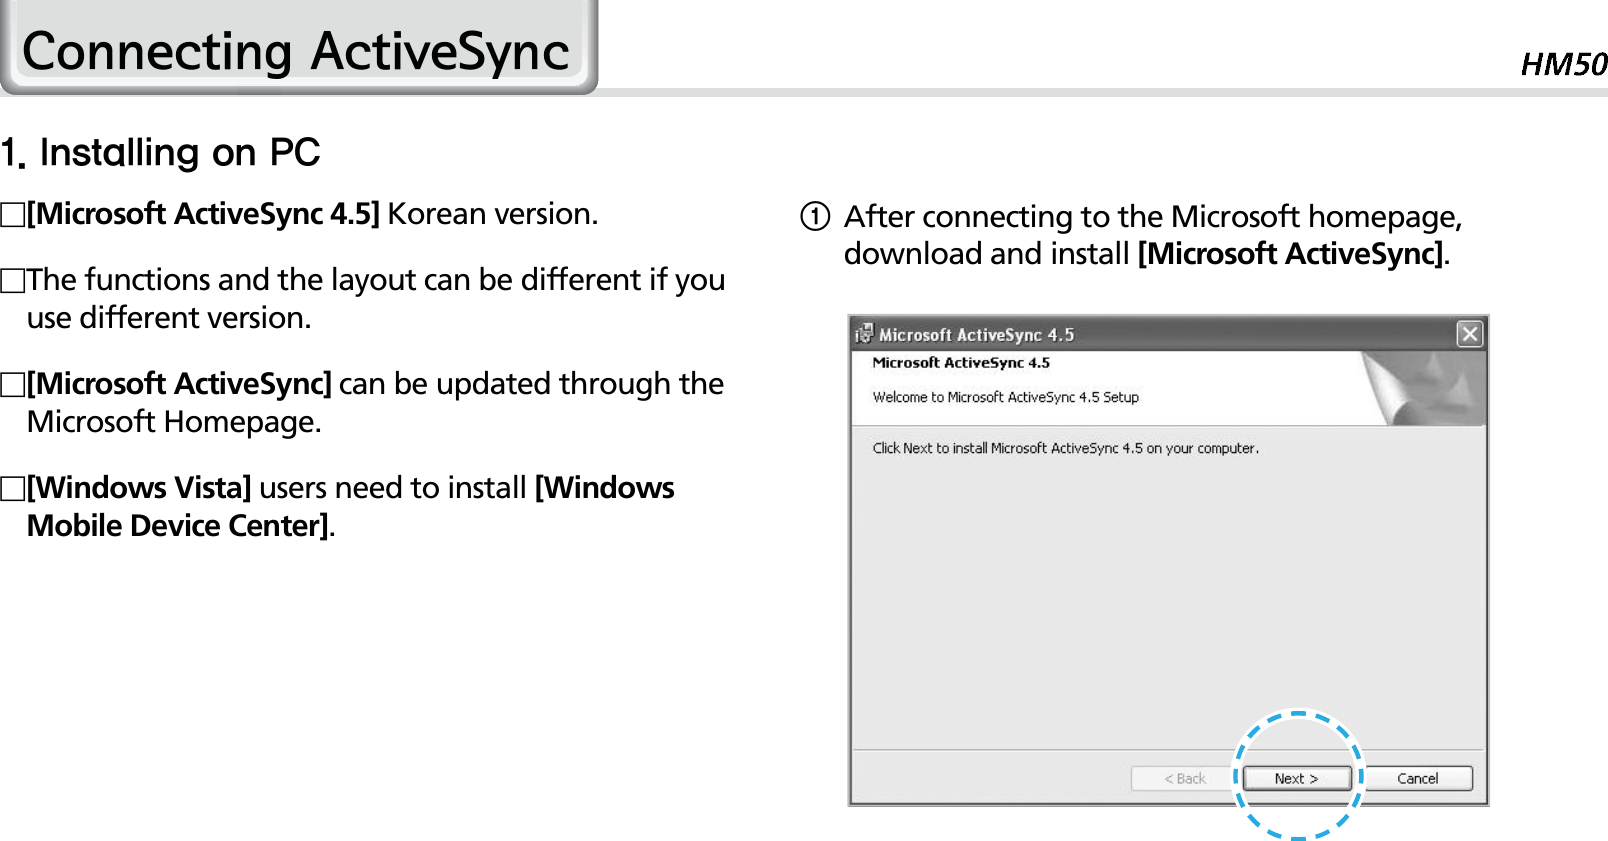 23&amp;RQQHFWLQJ$FWLYH6\QF1After connecting to the Microsoft homepage, download and install [Microsoft ActiveSync].*OTUBMMJOHPO1$[Microsoft ActiveSync 4.5] Korean version.The functions and the layout can be different if you use different version.   [Microsoft ActiveSync] can be updated through the Microsoft Homepage.[Windows Vista] users need to install [Windows Mobile Device Center].